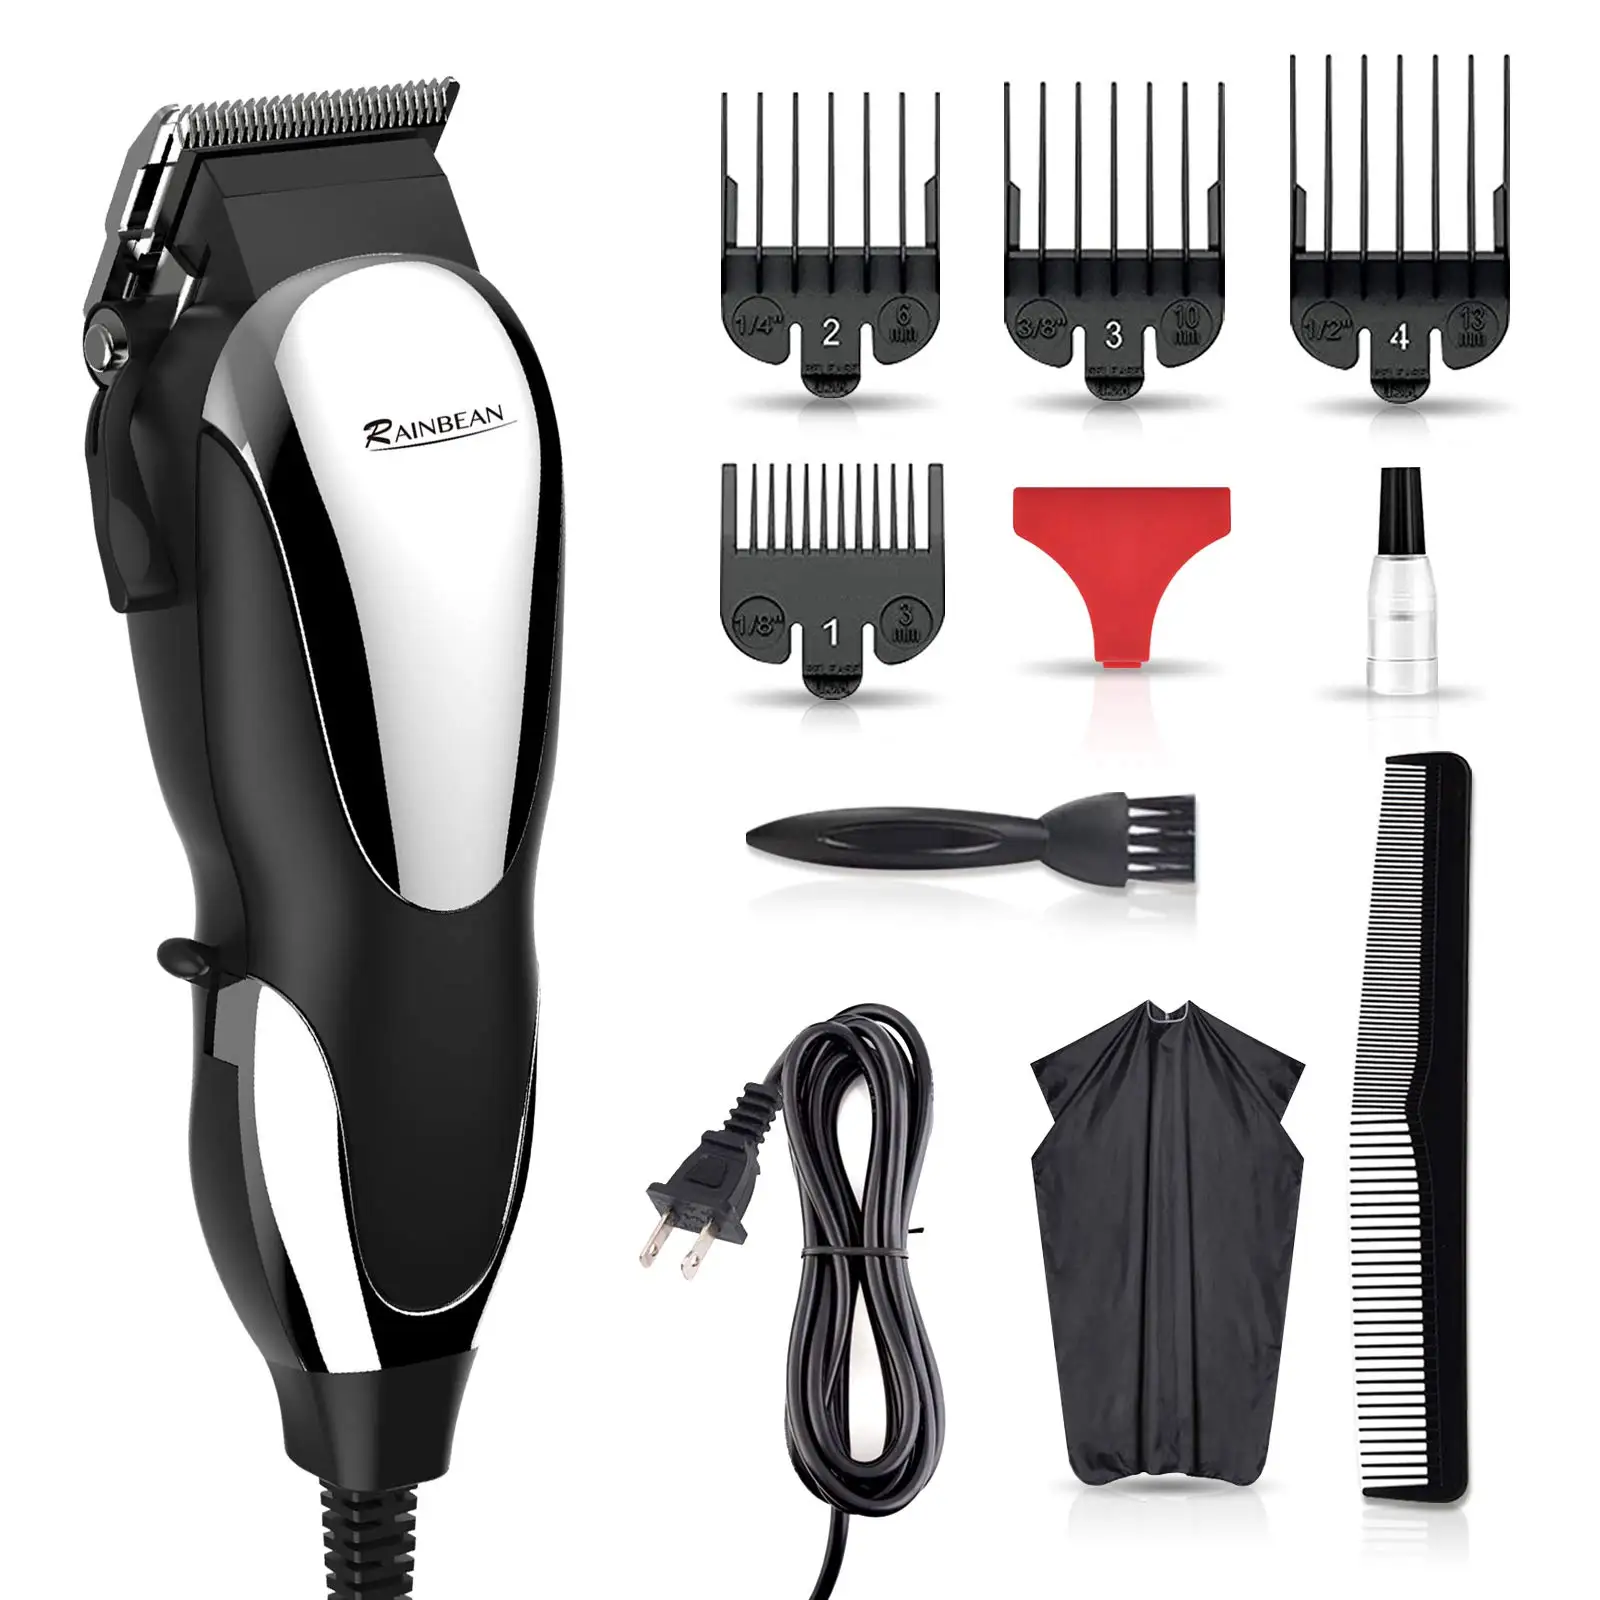 Enlarge Hair Trimmer Corded Hair Clippers for Men Kids Strong Motor Baber Salon Complete Hair Beard Clipping Trim Kit From Usa Barber